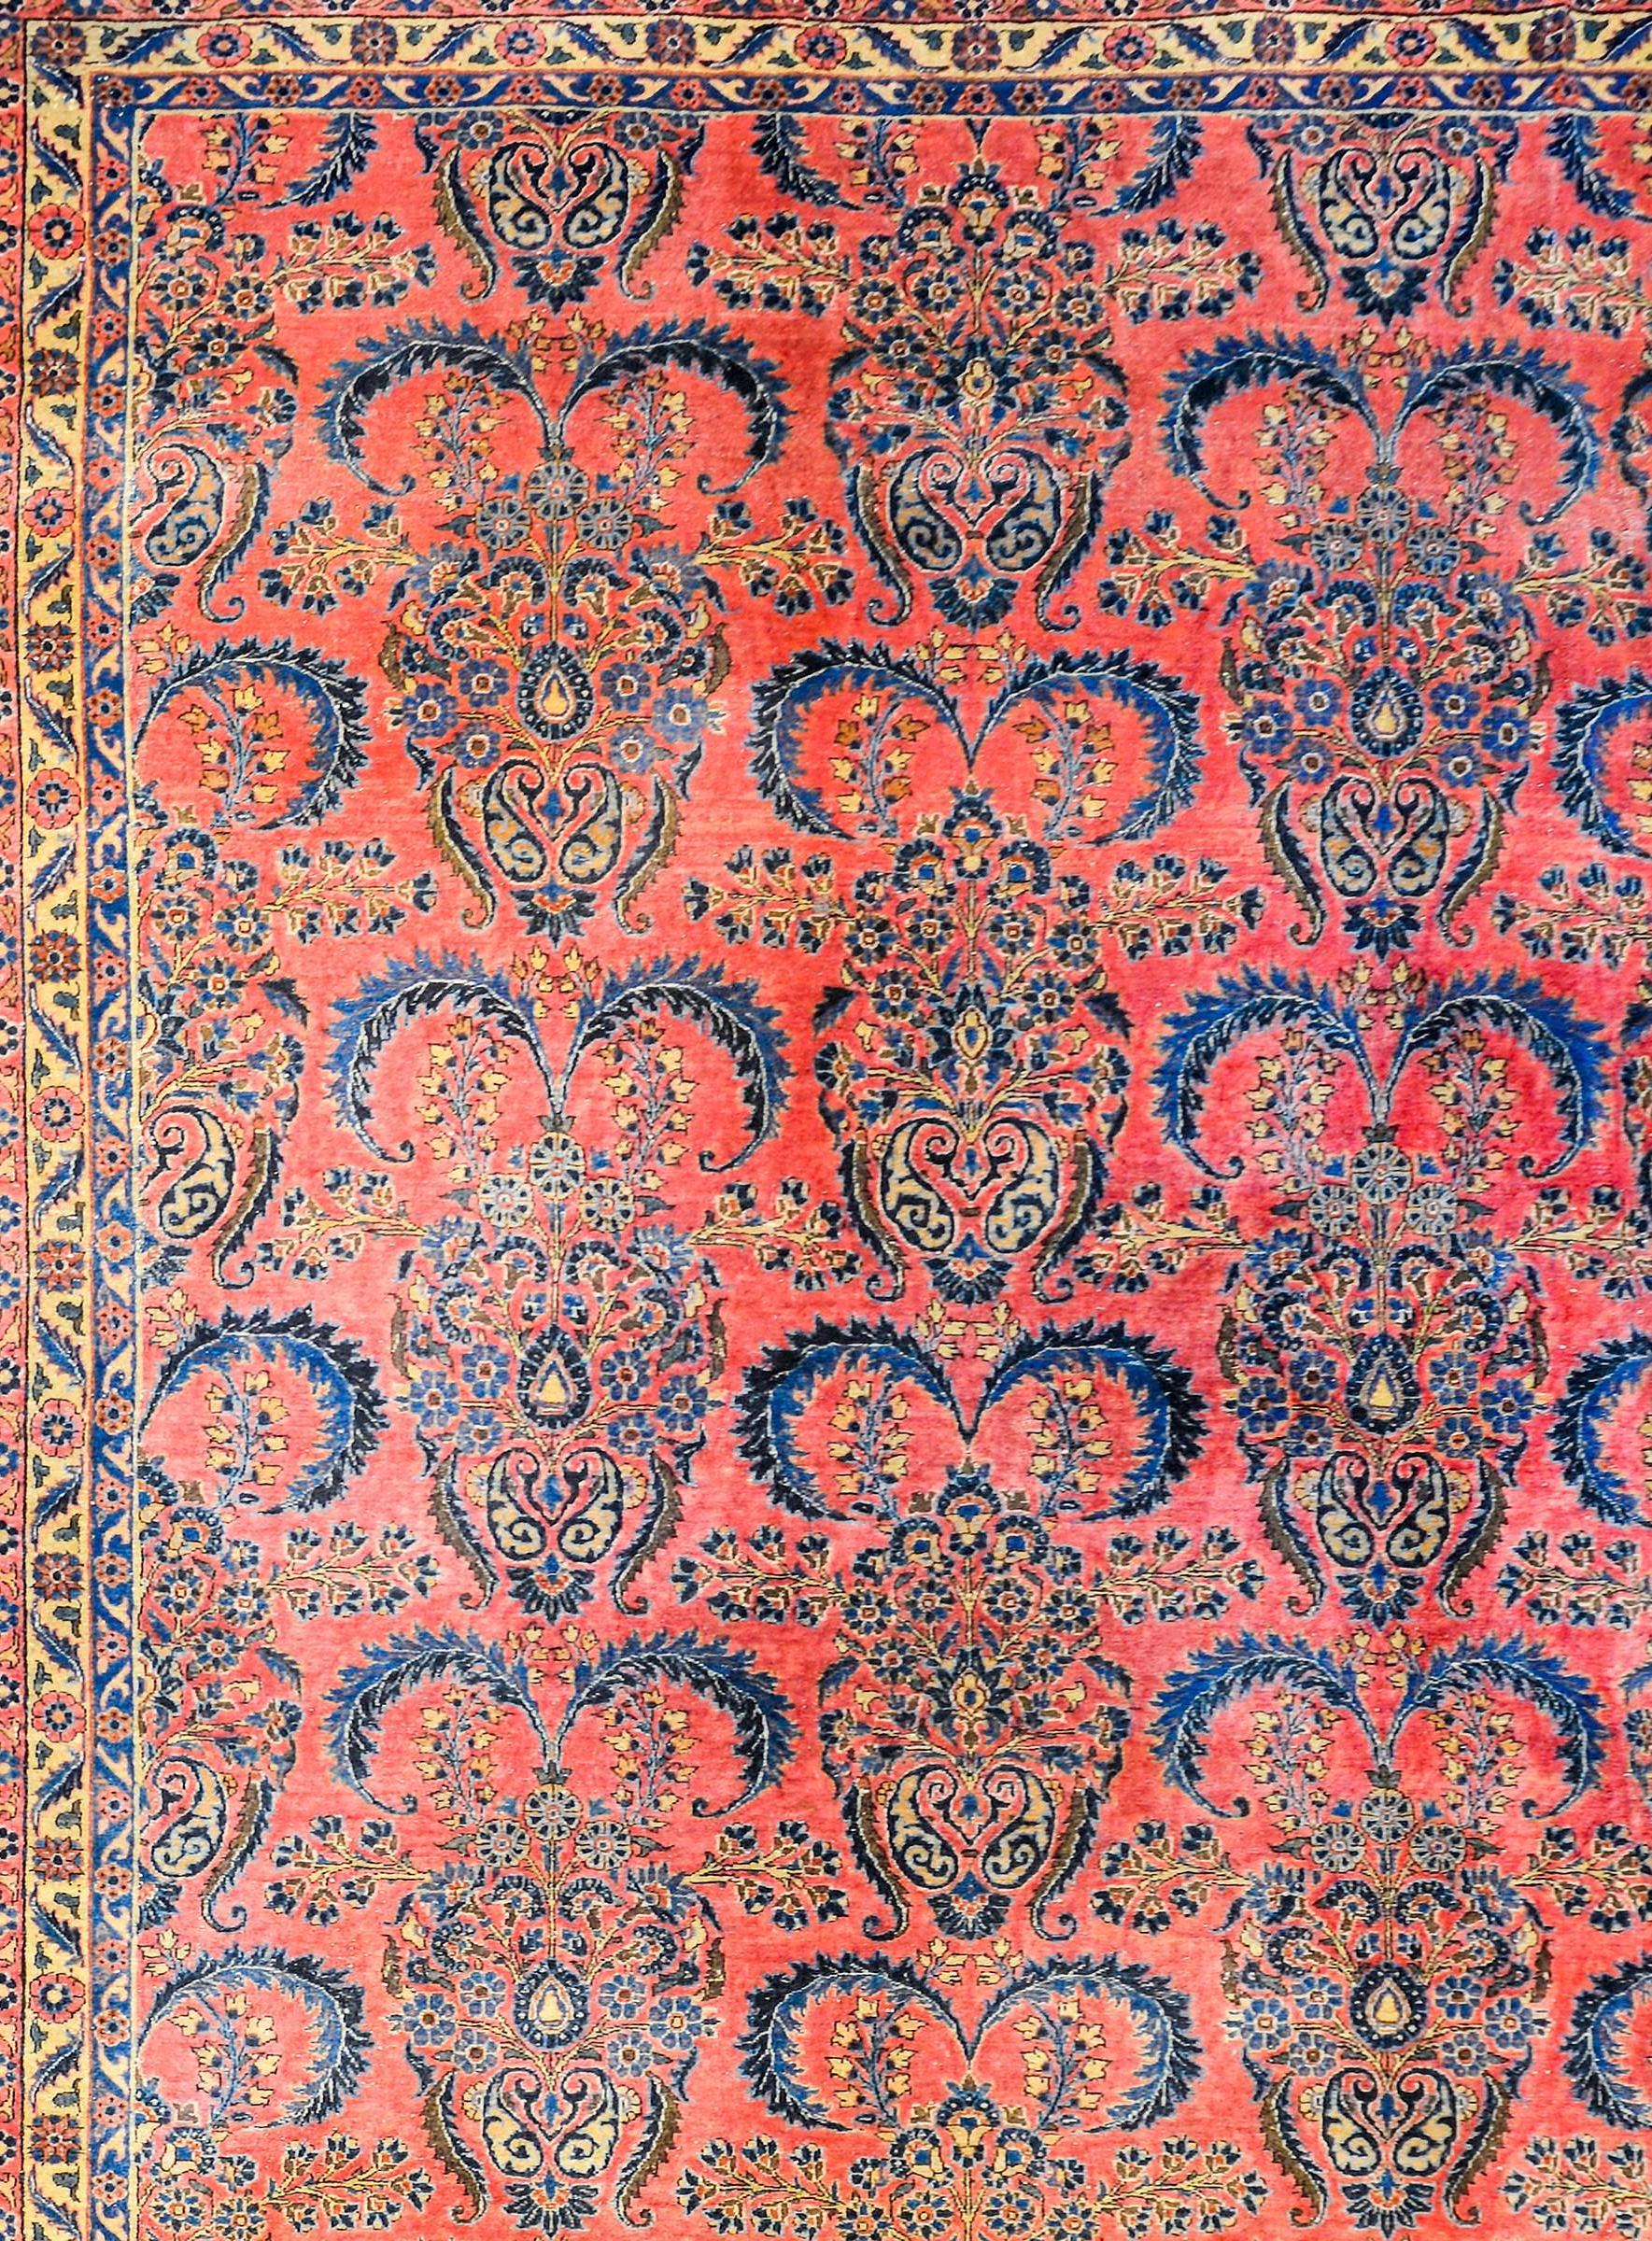 An outstanding early 20th century Persian Kashan rug with a sophisticated all-over pattern of flowering festoons woven in light and dark indigo, pink, and cream, on a beautiful coral background. The border is complementary with a wide band with